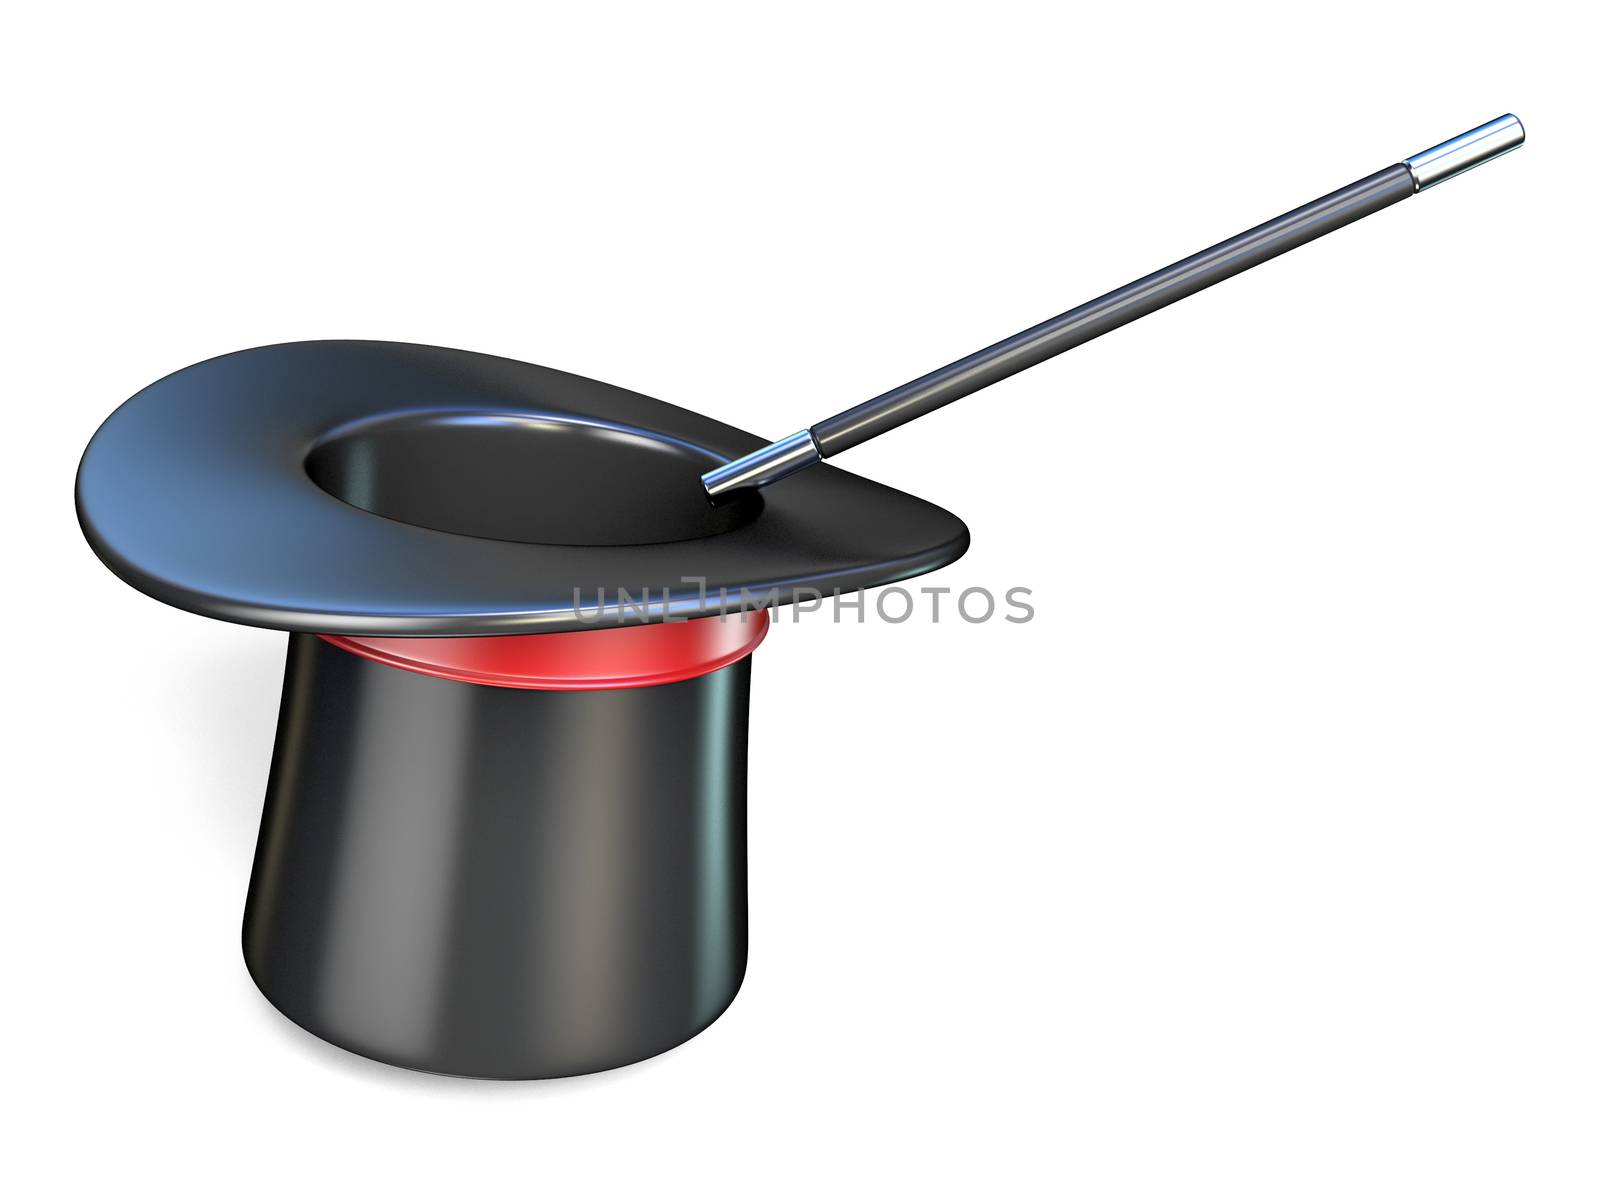 Magic wand and hat 3D render illustration isolated on white background